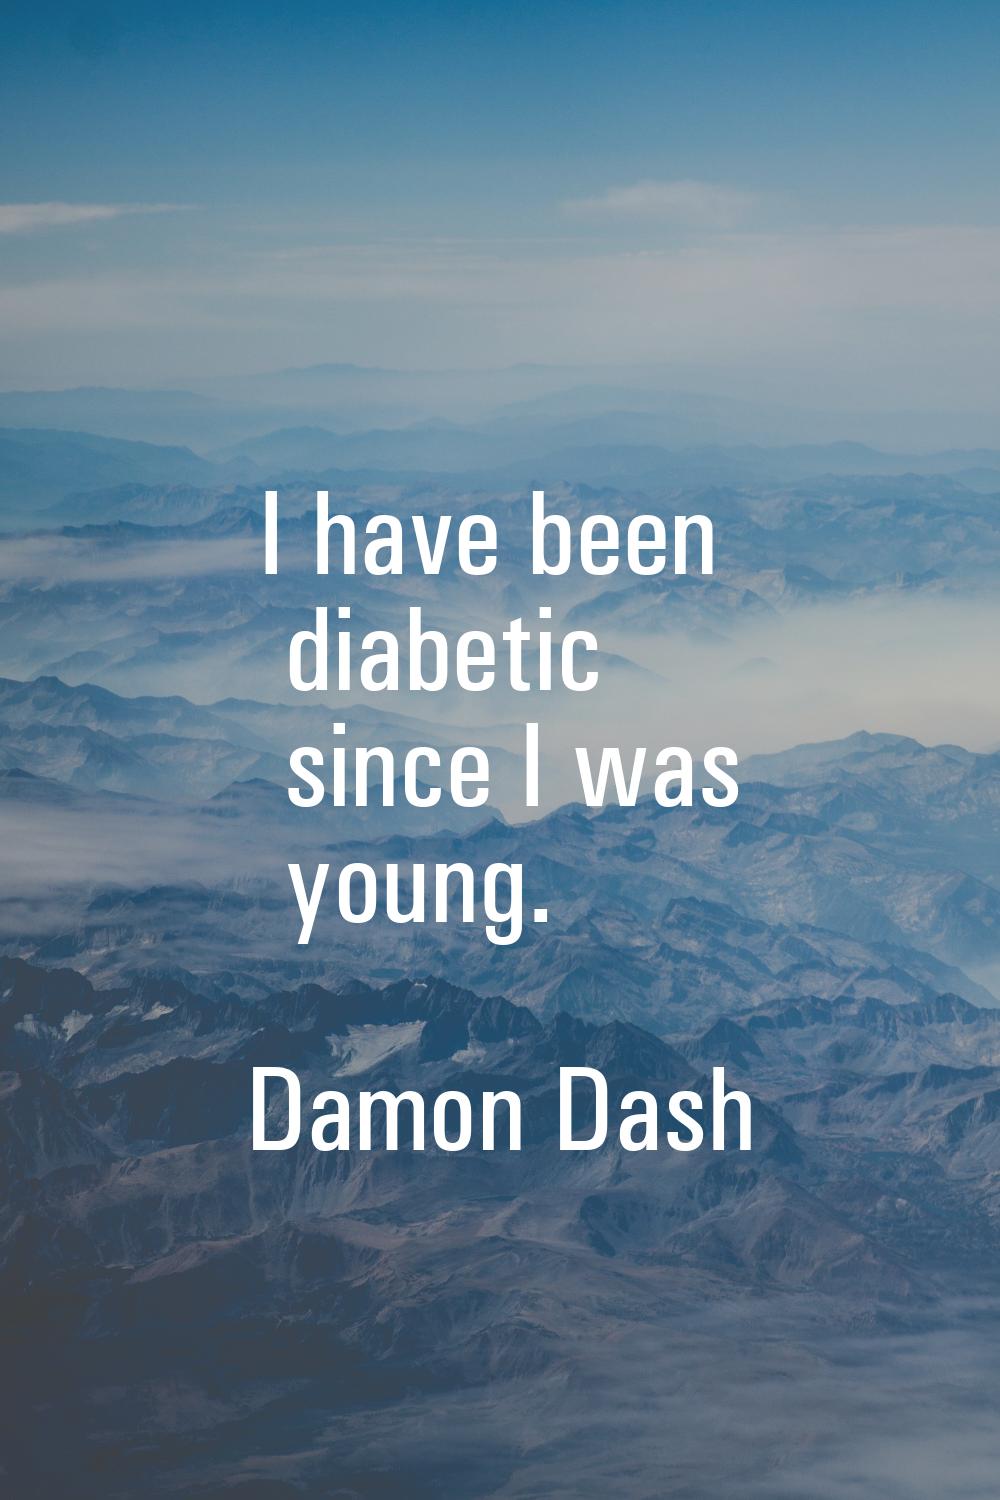 I have been diabetic since I was young.